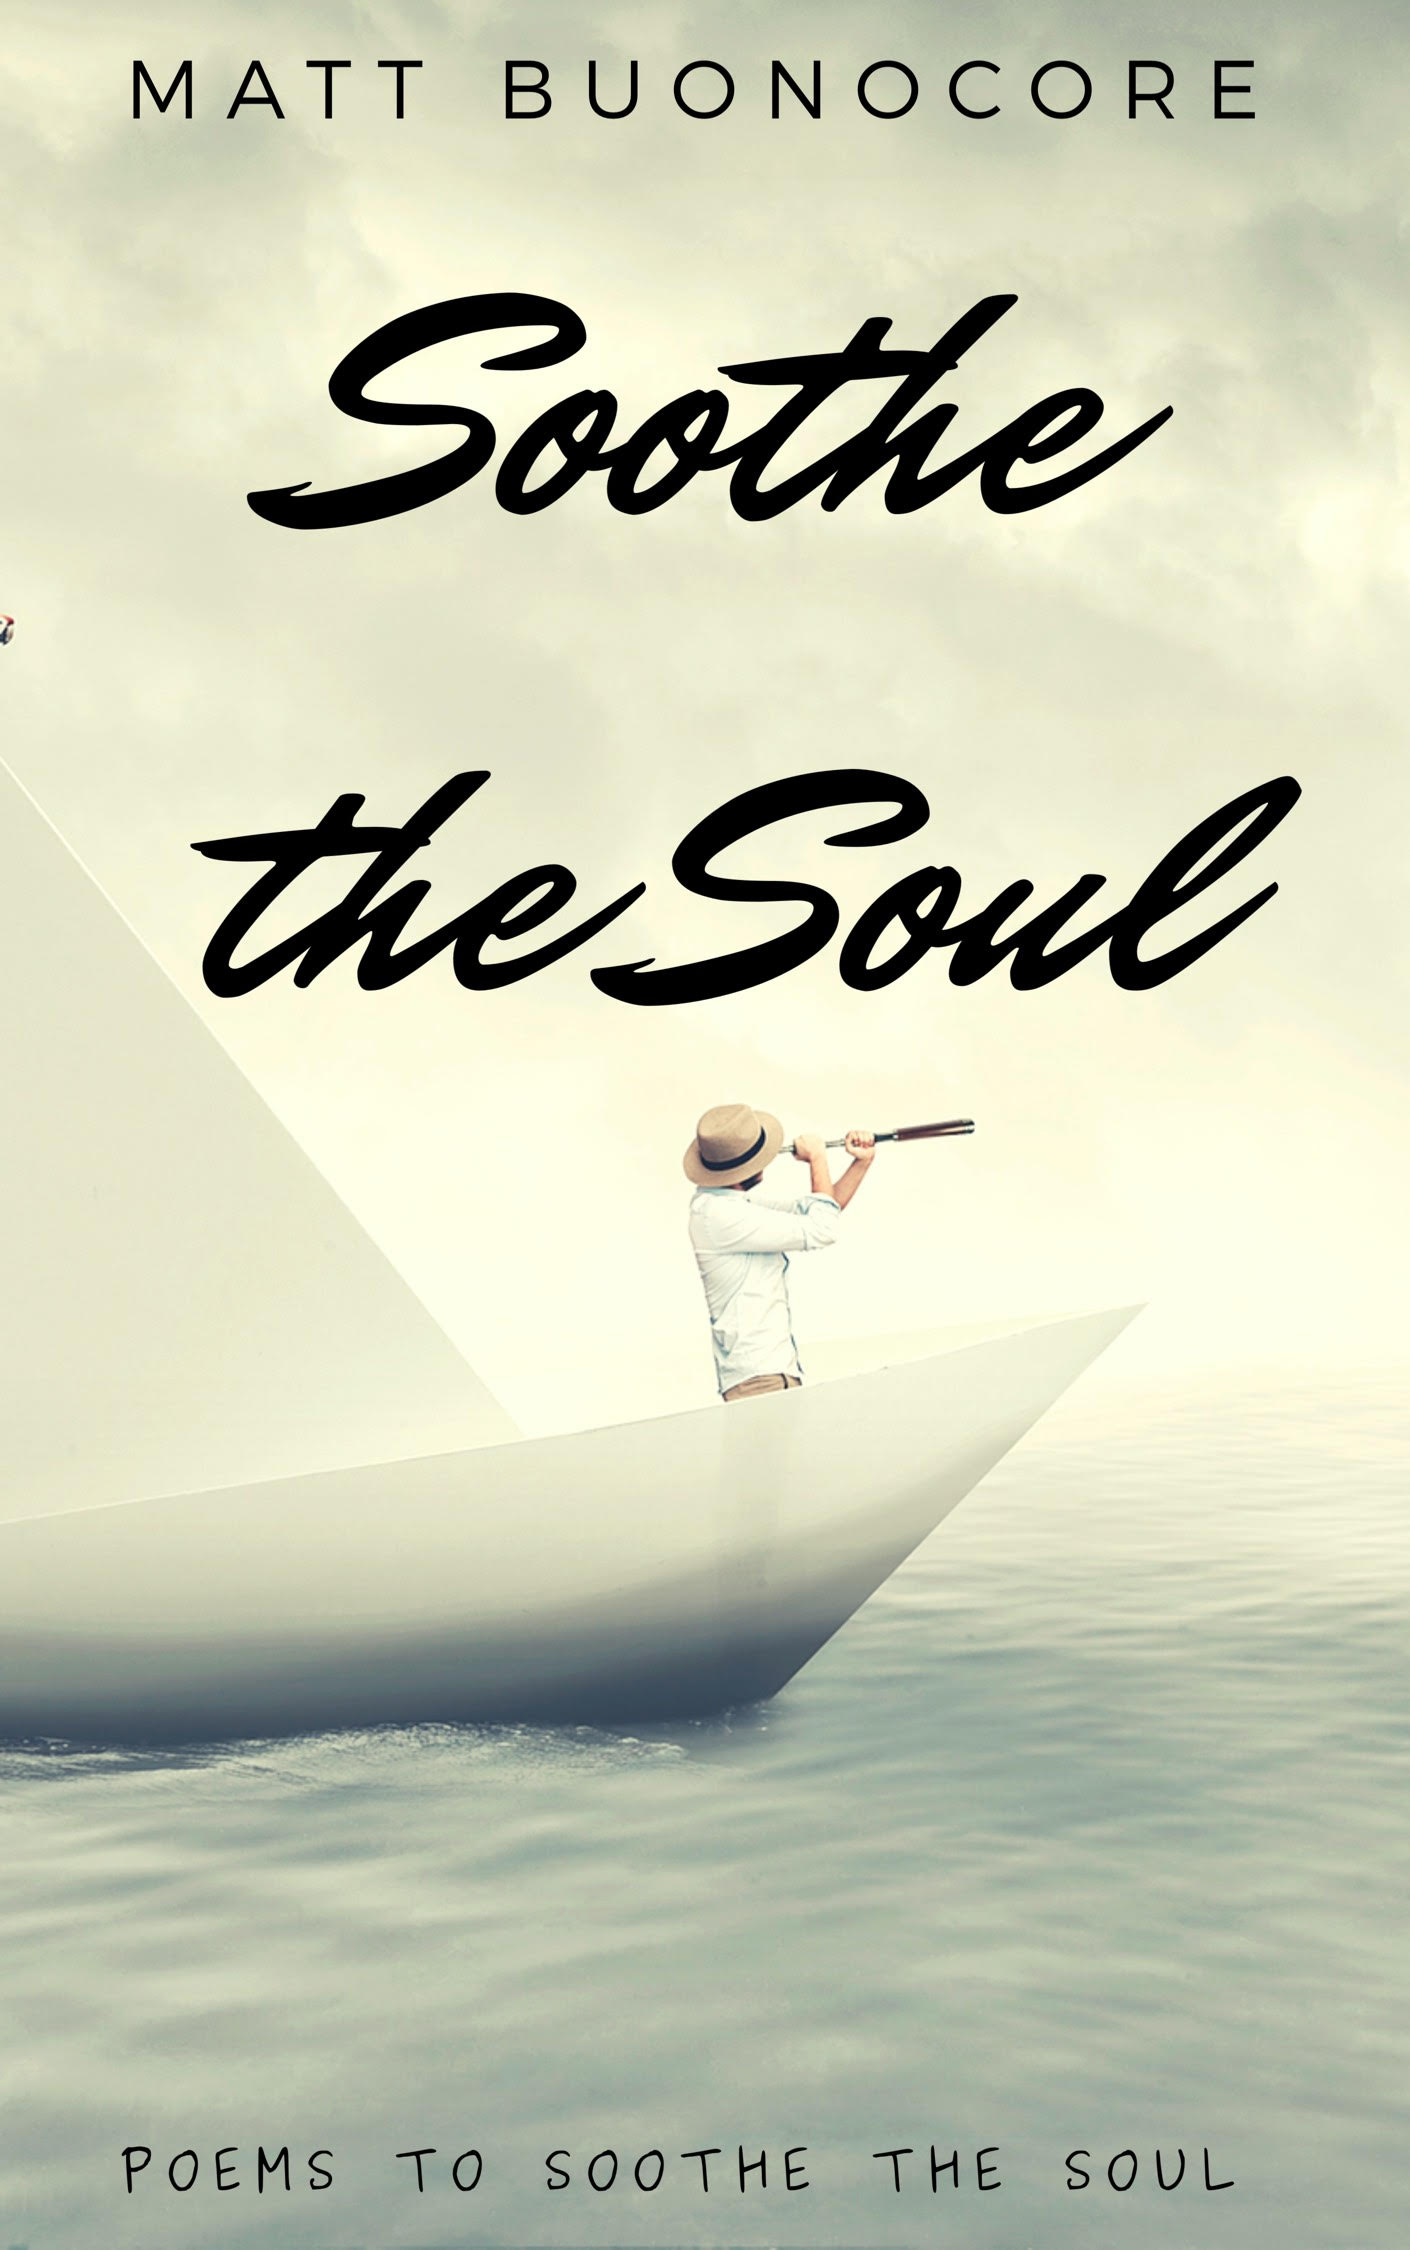 FREE: Soothe The Soul by Matt Buonocore